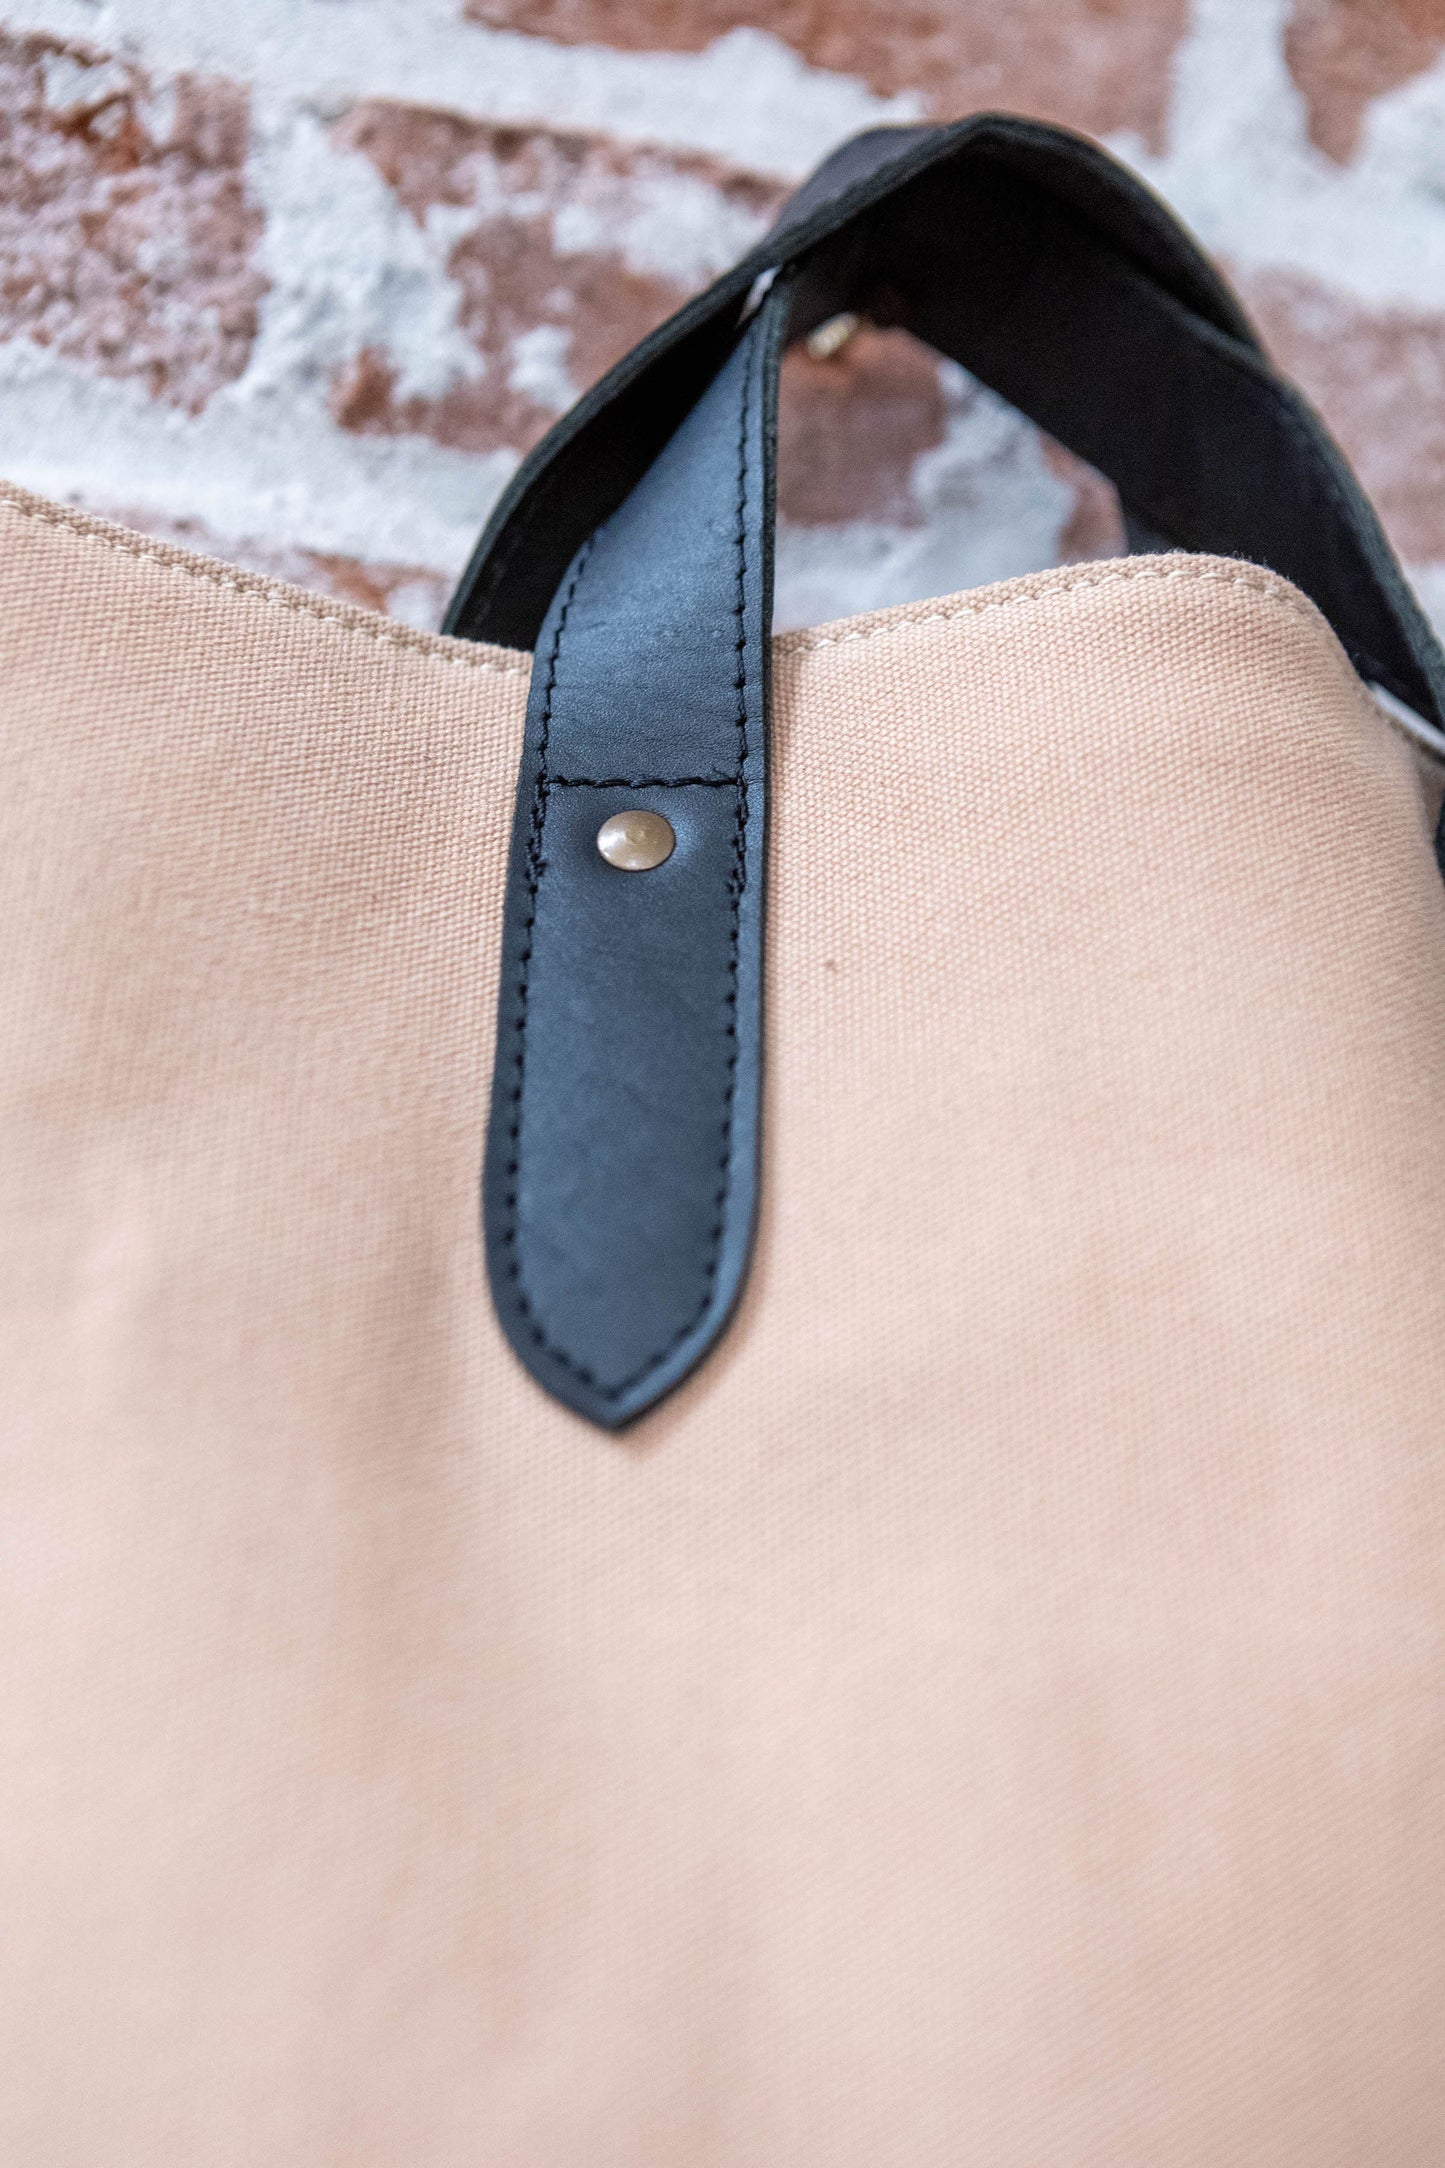 The Old Town Tote - Beige Canvas Black Leather